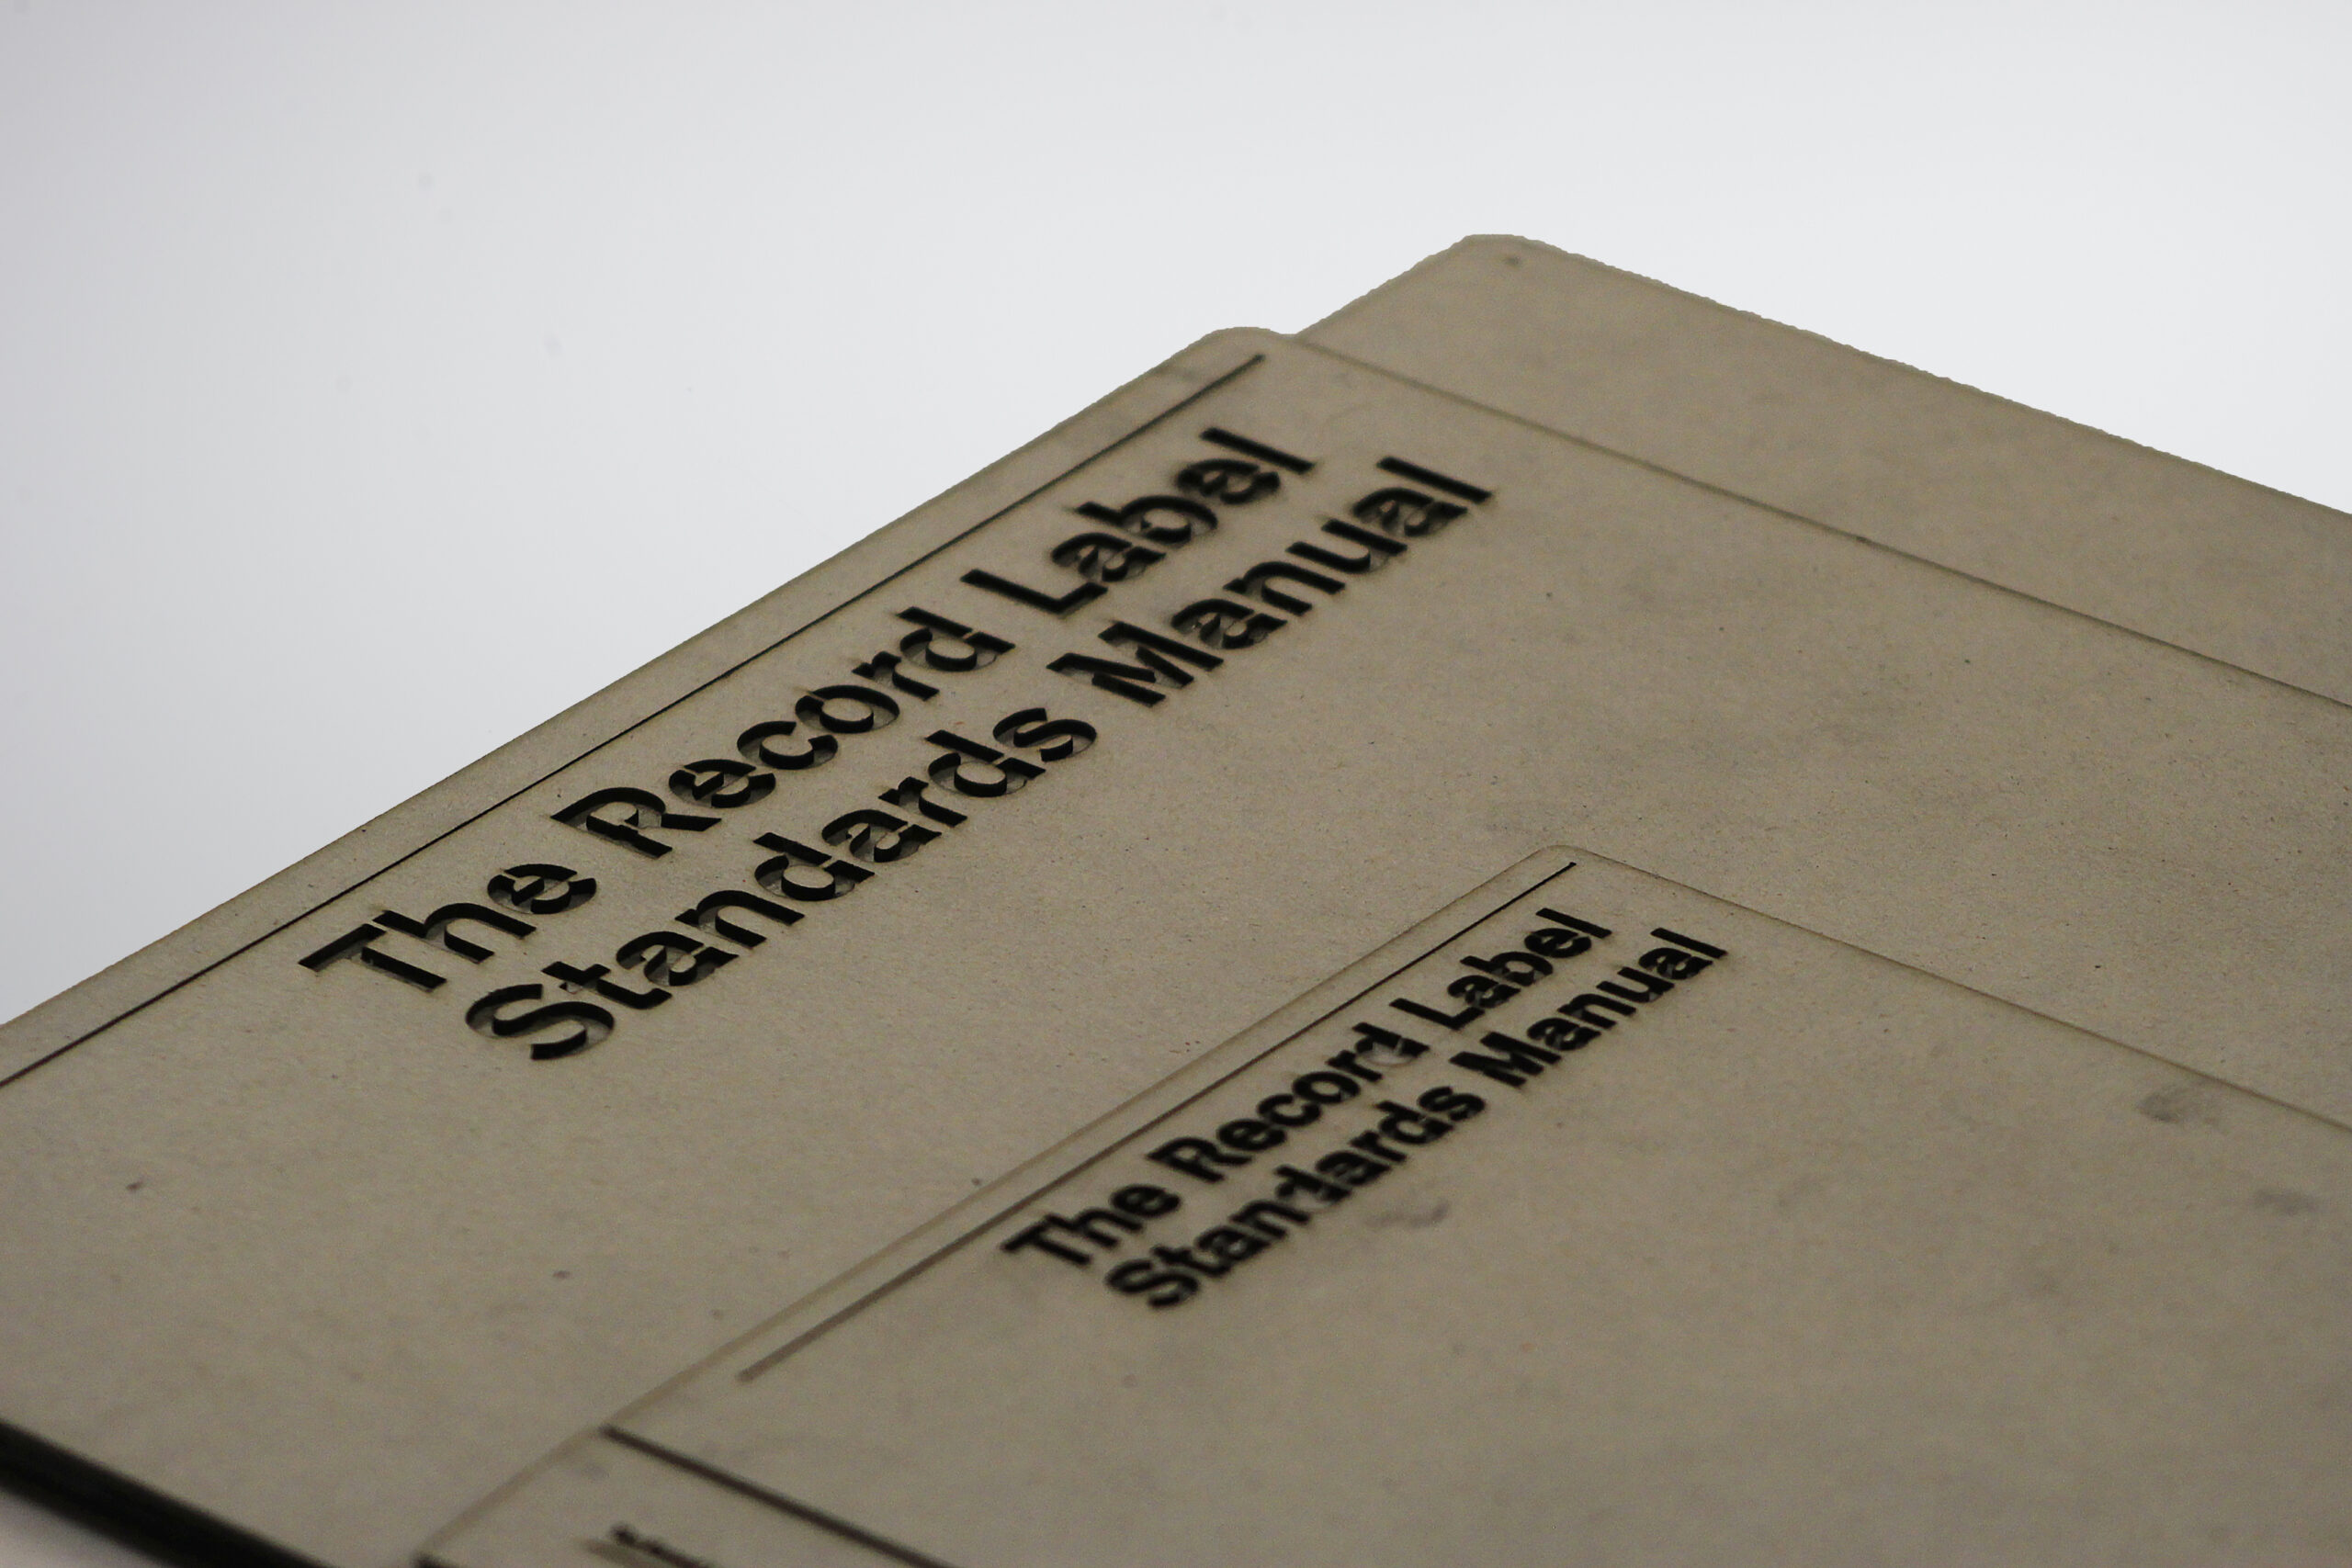 Record Label: Standards Manual